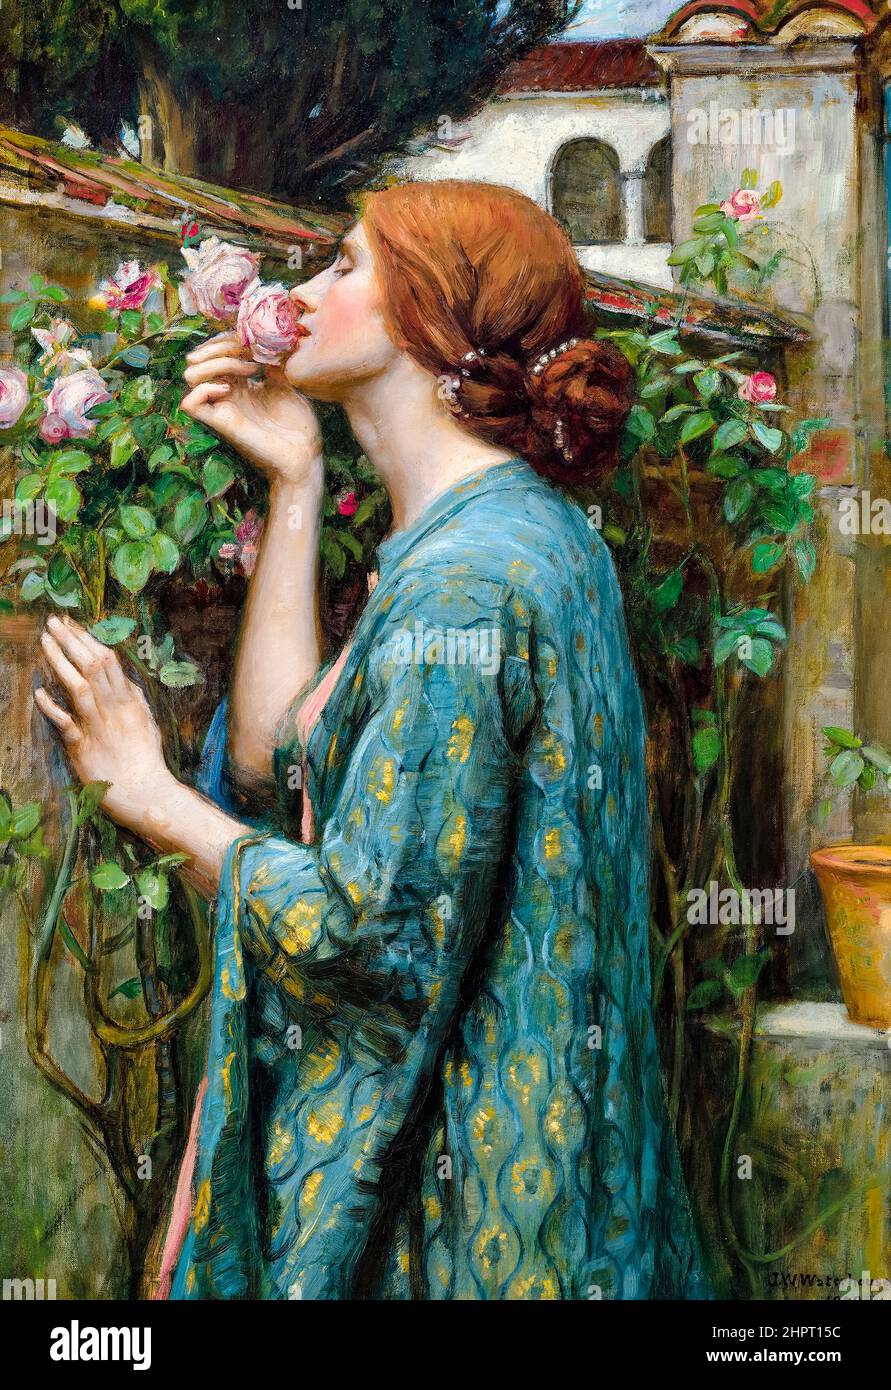 John William Waterhouse, painting, The Soul of the Rose, 1908, oil on canvas Stock Photo